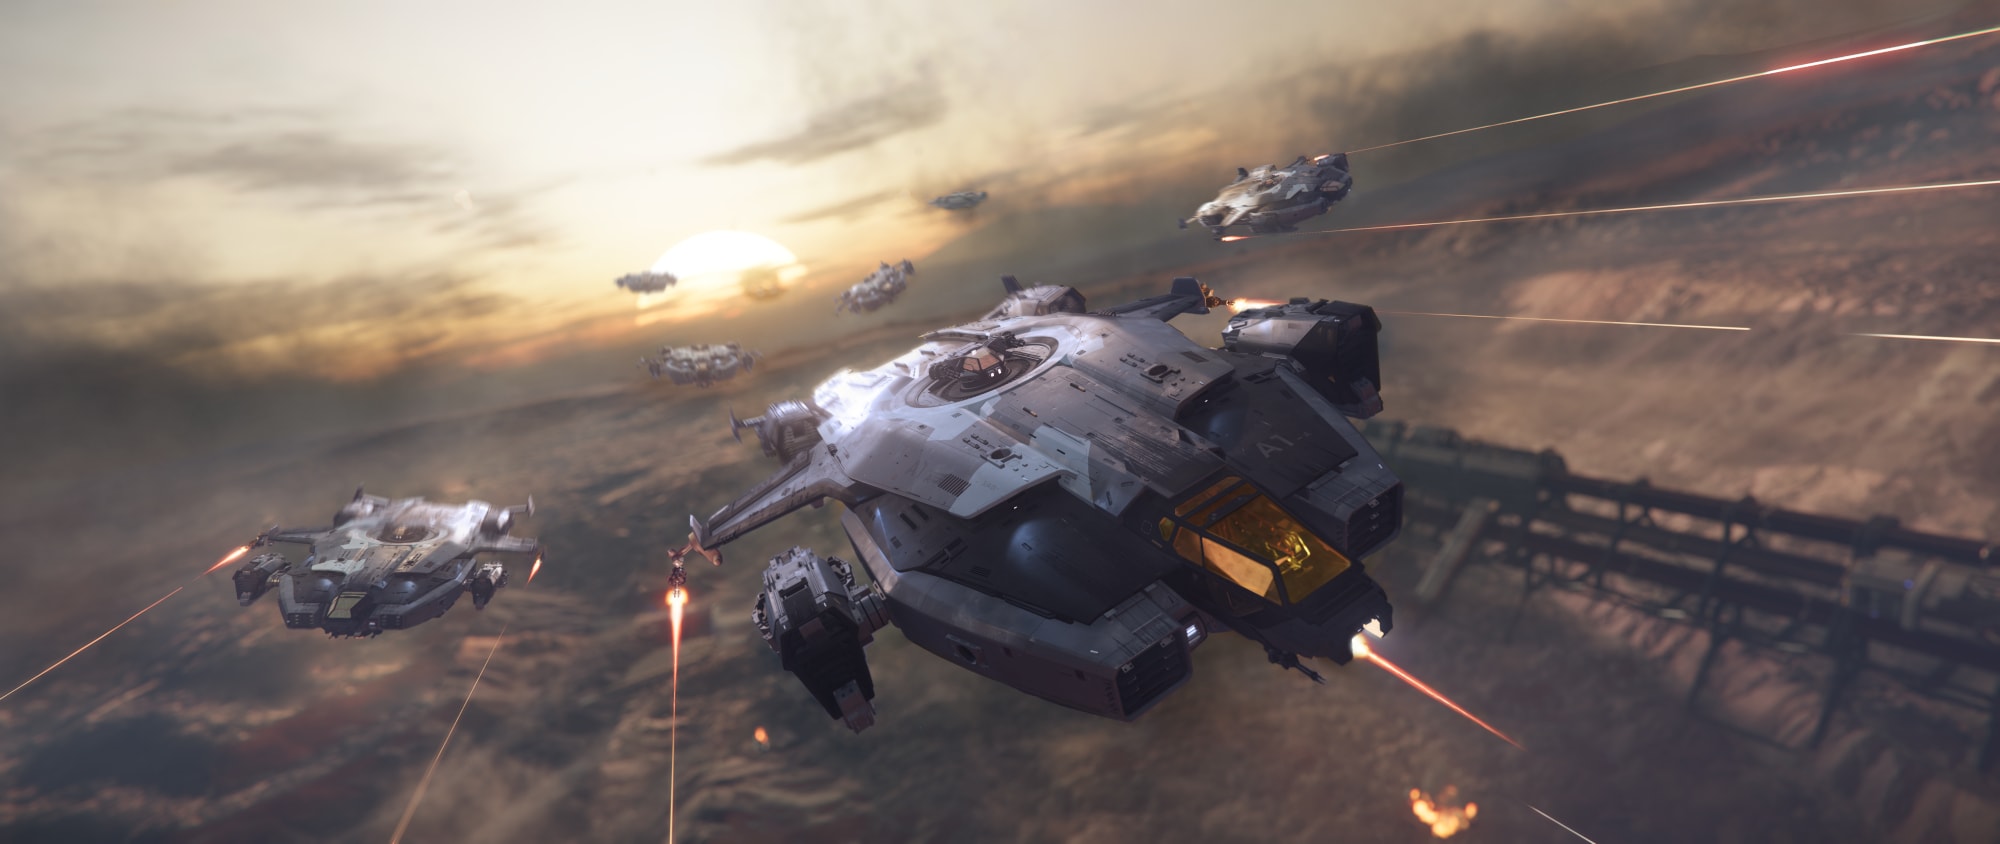 Star Citizen Kicks Off Invictus Launch Week 2952, Fly All Ships for